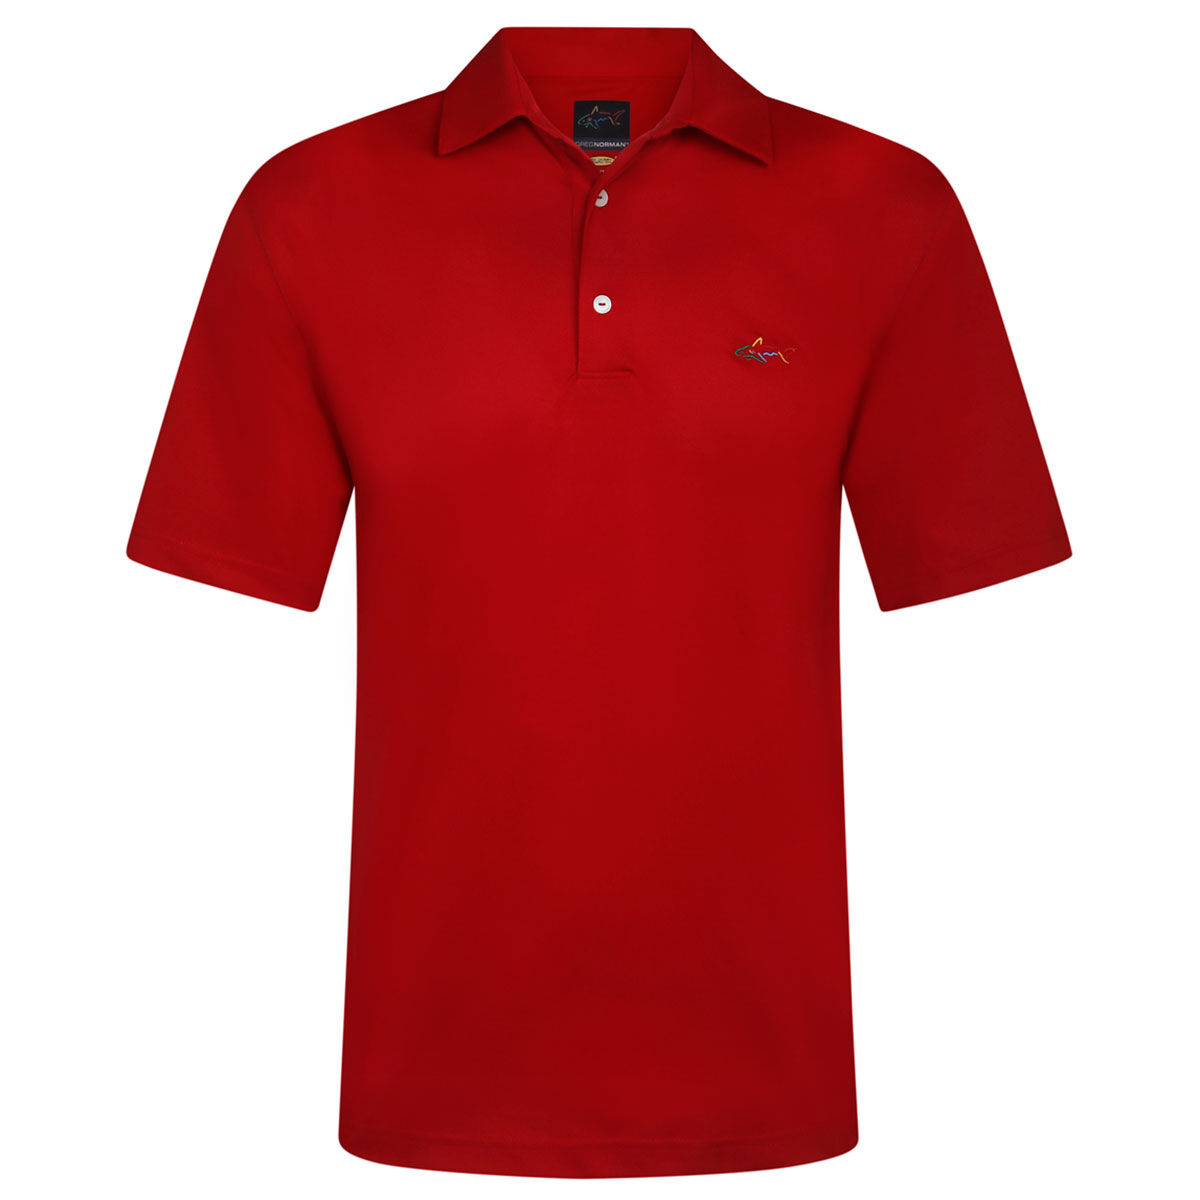 Greg Norman Red Embroidered Shark Logo Golf Polo Shirt, Mens | American Golf, Size: Small von Greg Norman